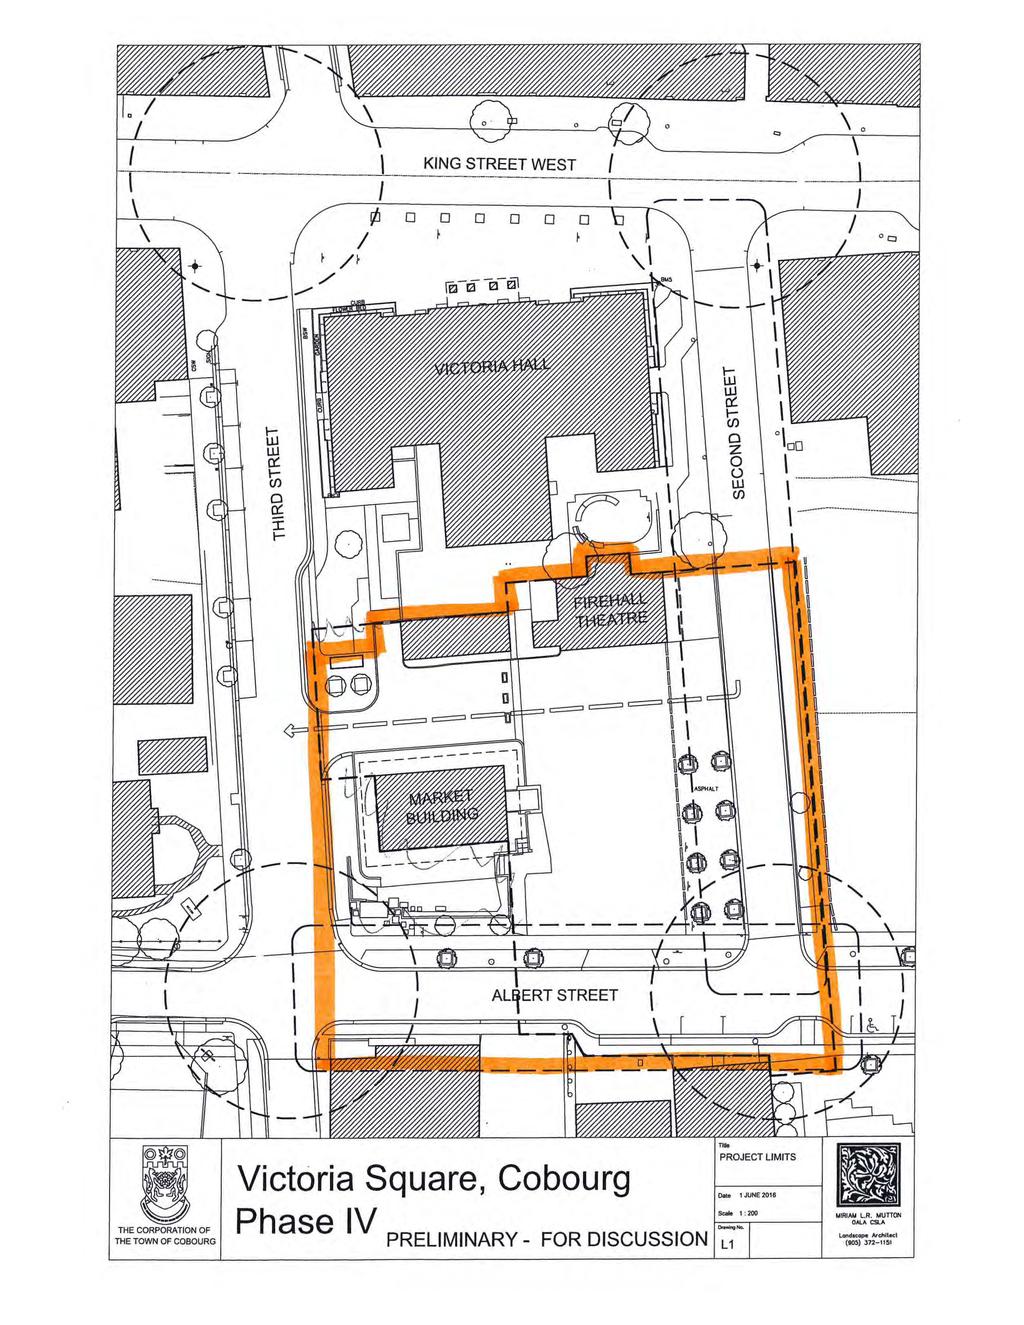 TNN Victoria Square, Cobourg PROJECT LIMITS NM 1 JUNE 2018 THE CORPORATION OF THE TOWN OF COBOURG Phase IV PRELIMINARY